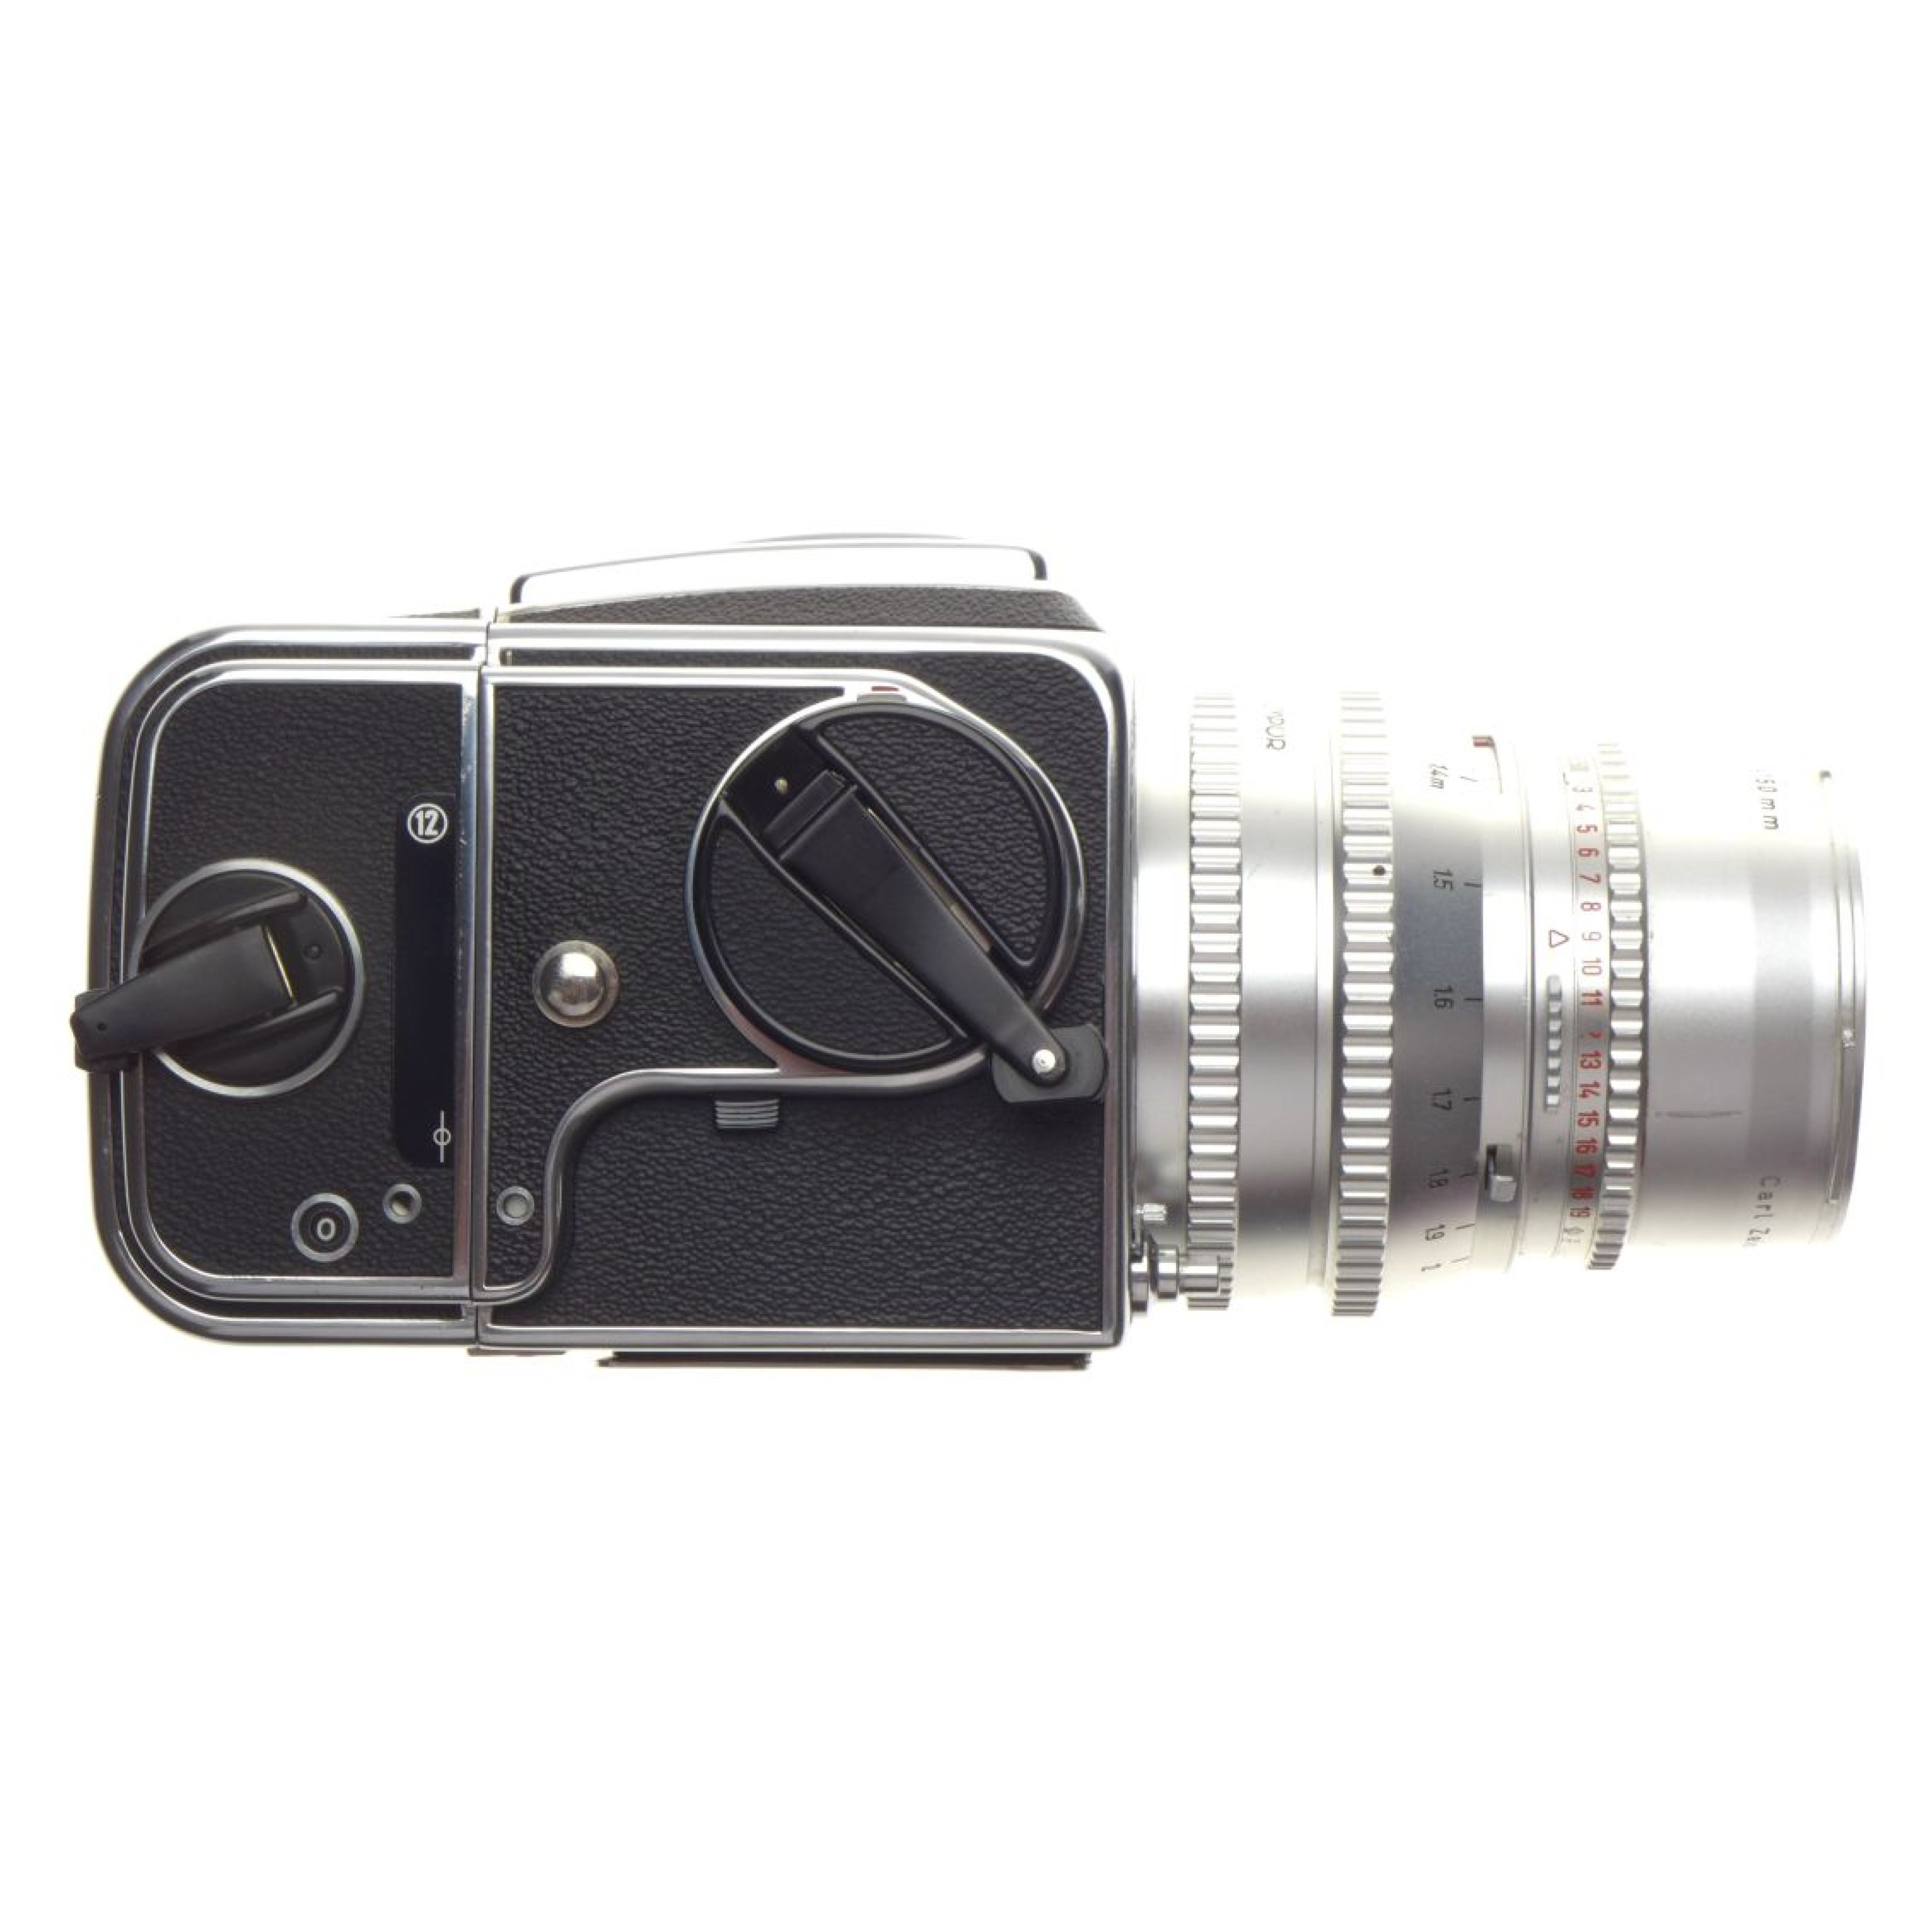 Hasselblad 500 C Chrome Body 6x6 Sonnar Zeiss 1:4 f=150mm Silver lens 4/150  WLF